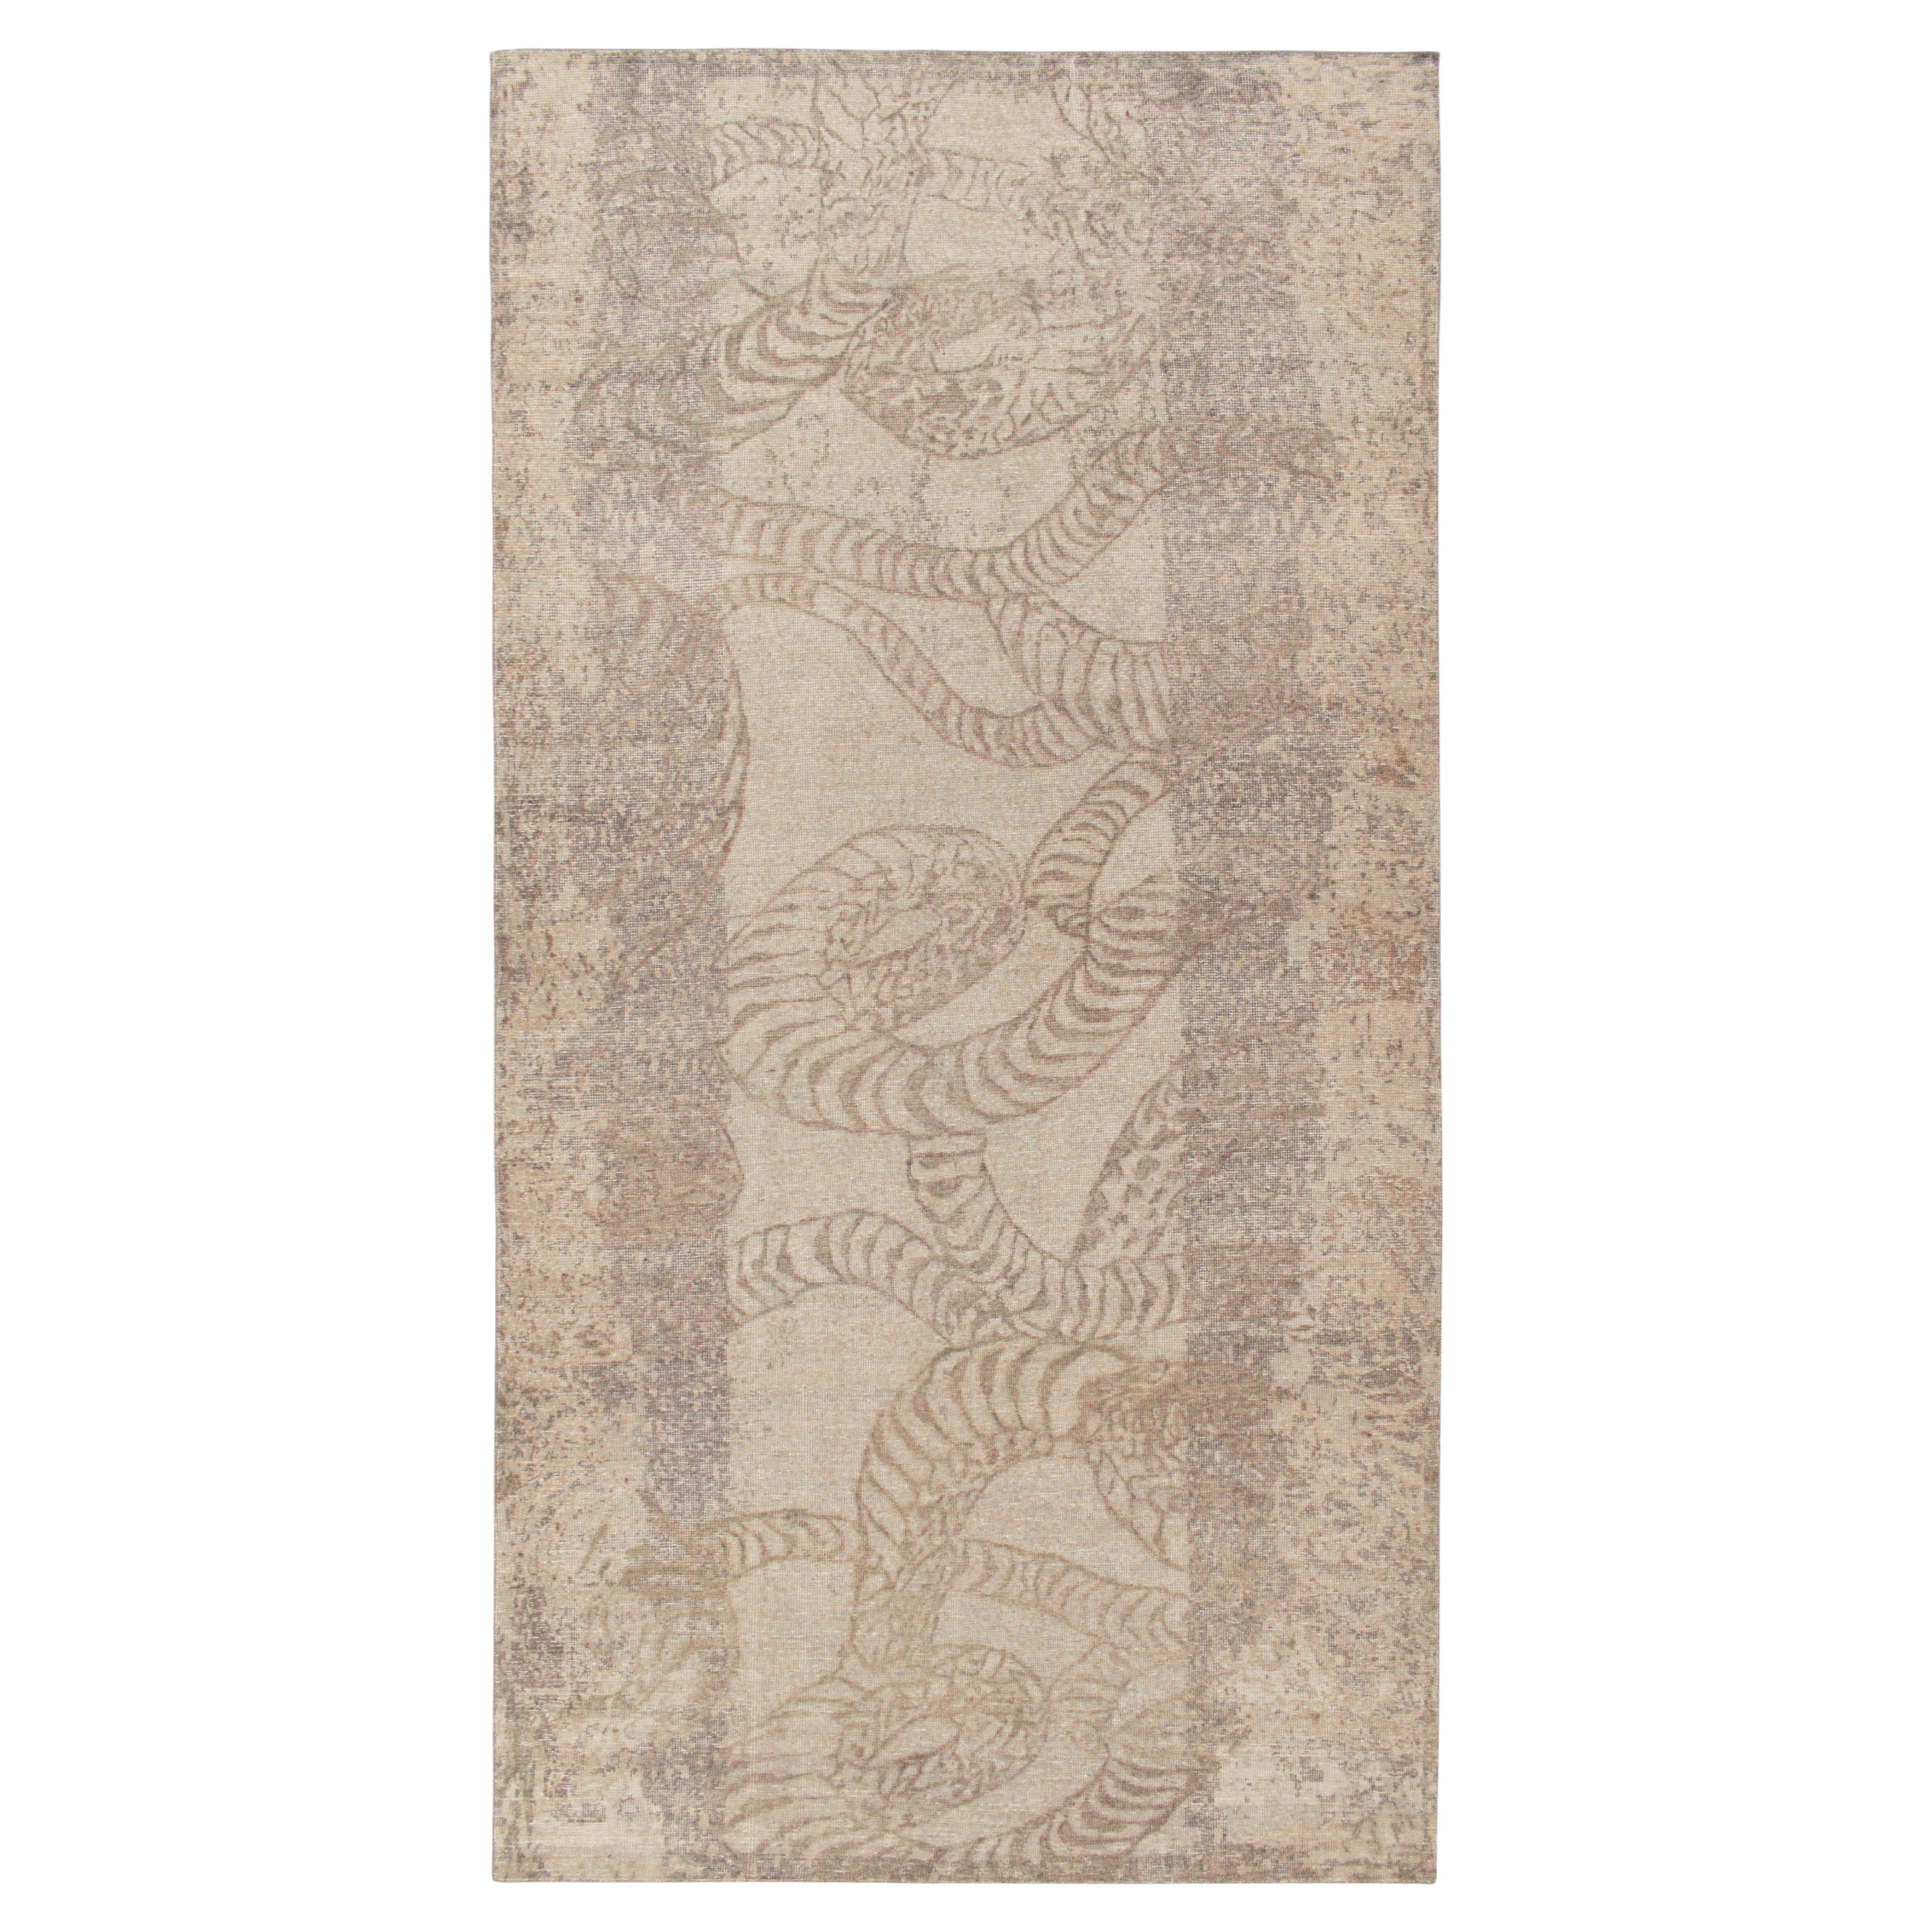 Rug & Kilim's Distressed Style Abstract Rug in Beige-Brown & Gray Pattern For Sale